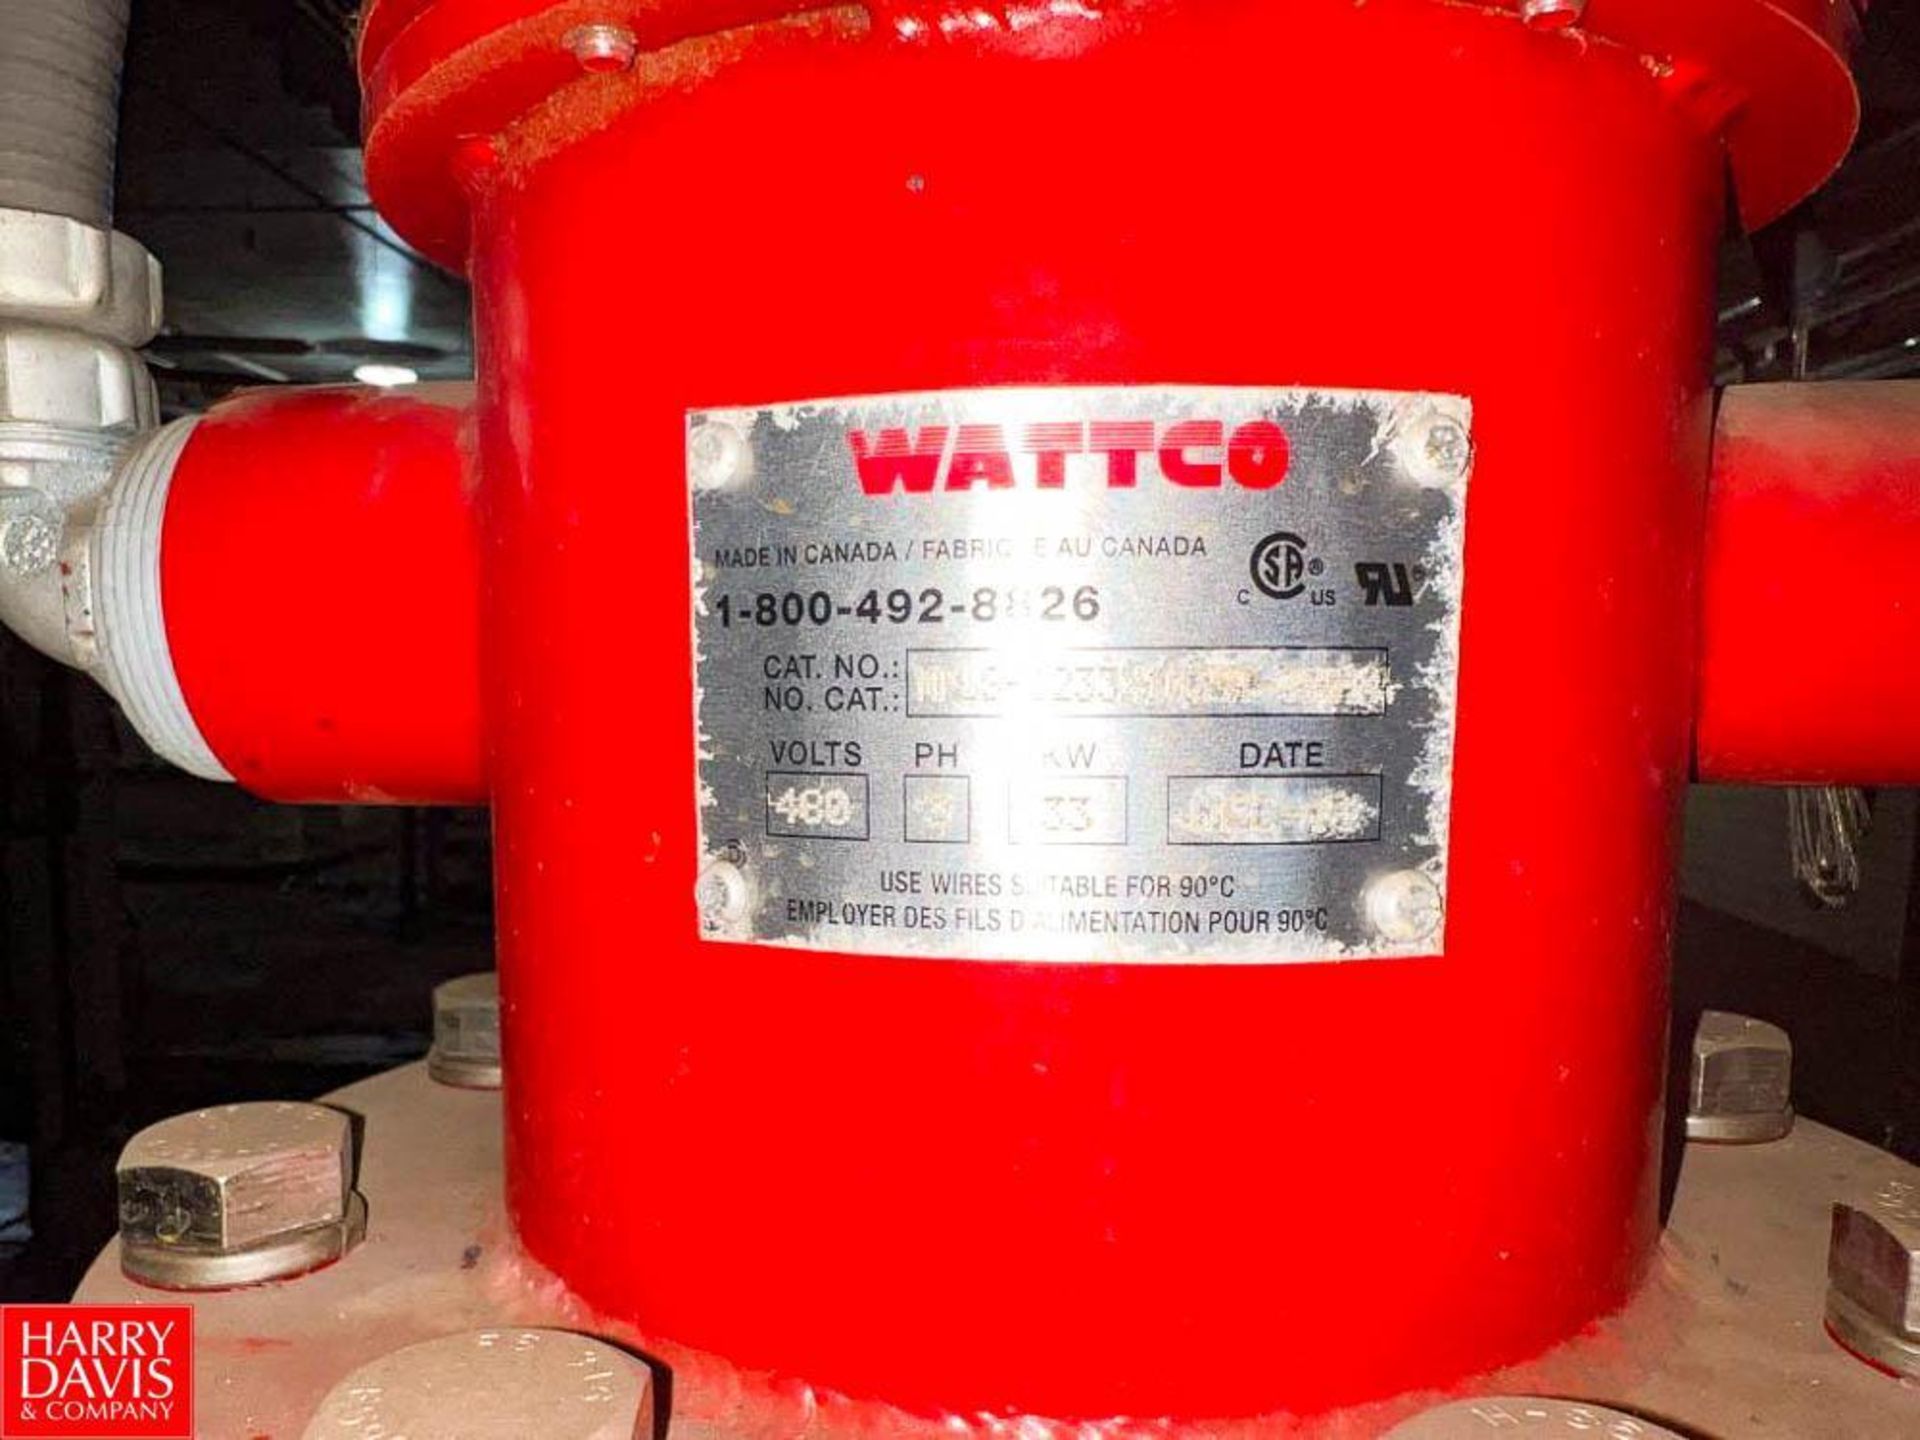 Wattco Industrial Heater, Catalog Number: MPLS-1233X1039T-30014 - Image 2 of 2